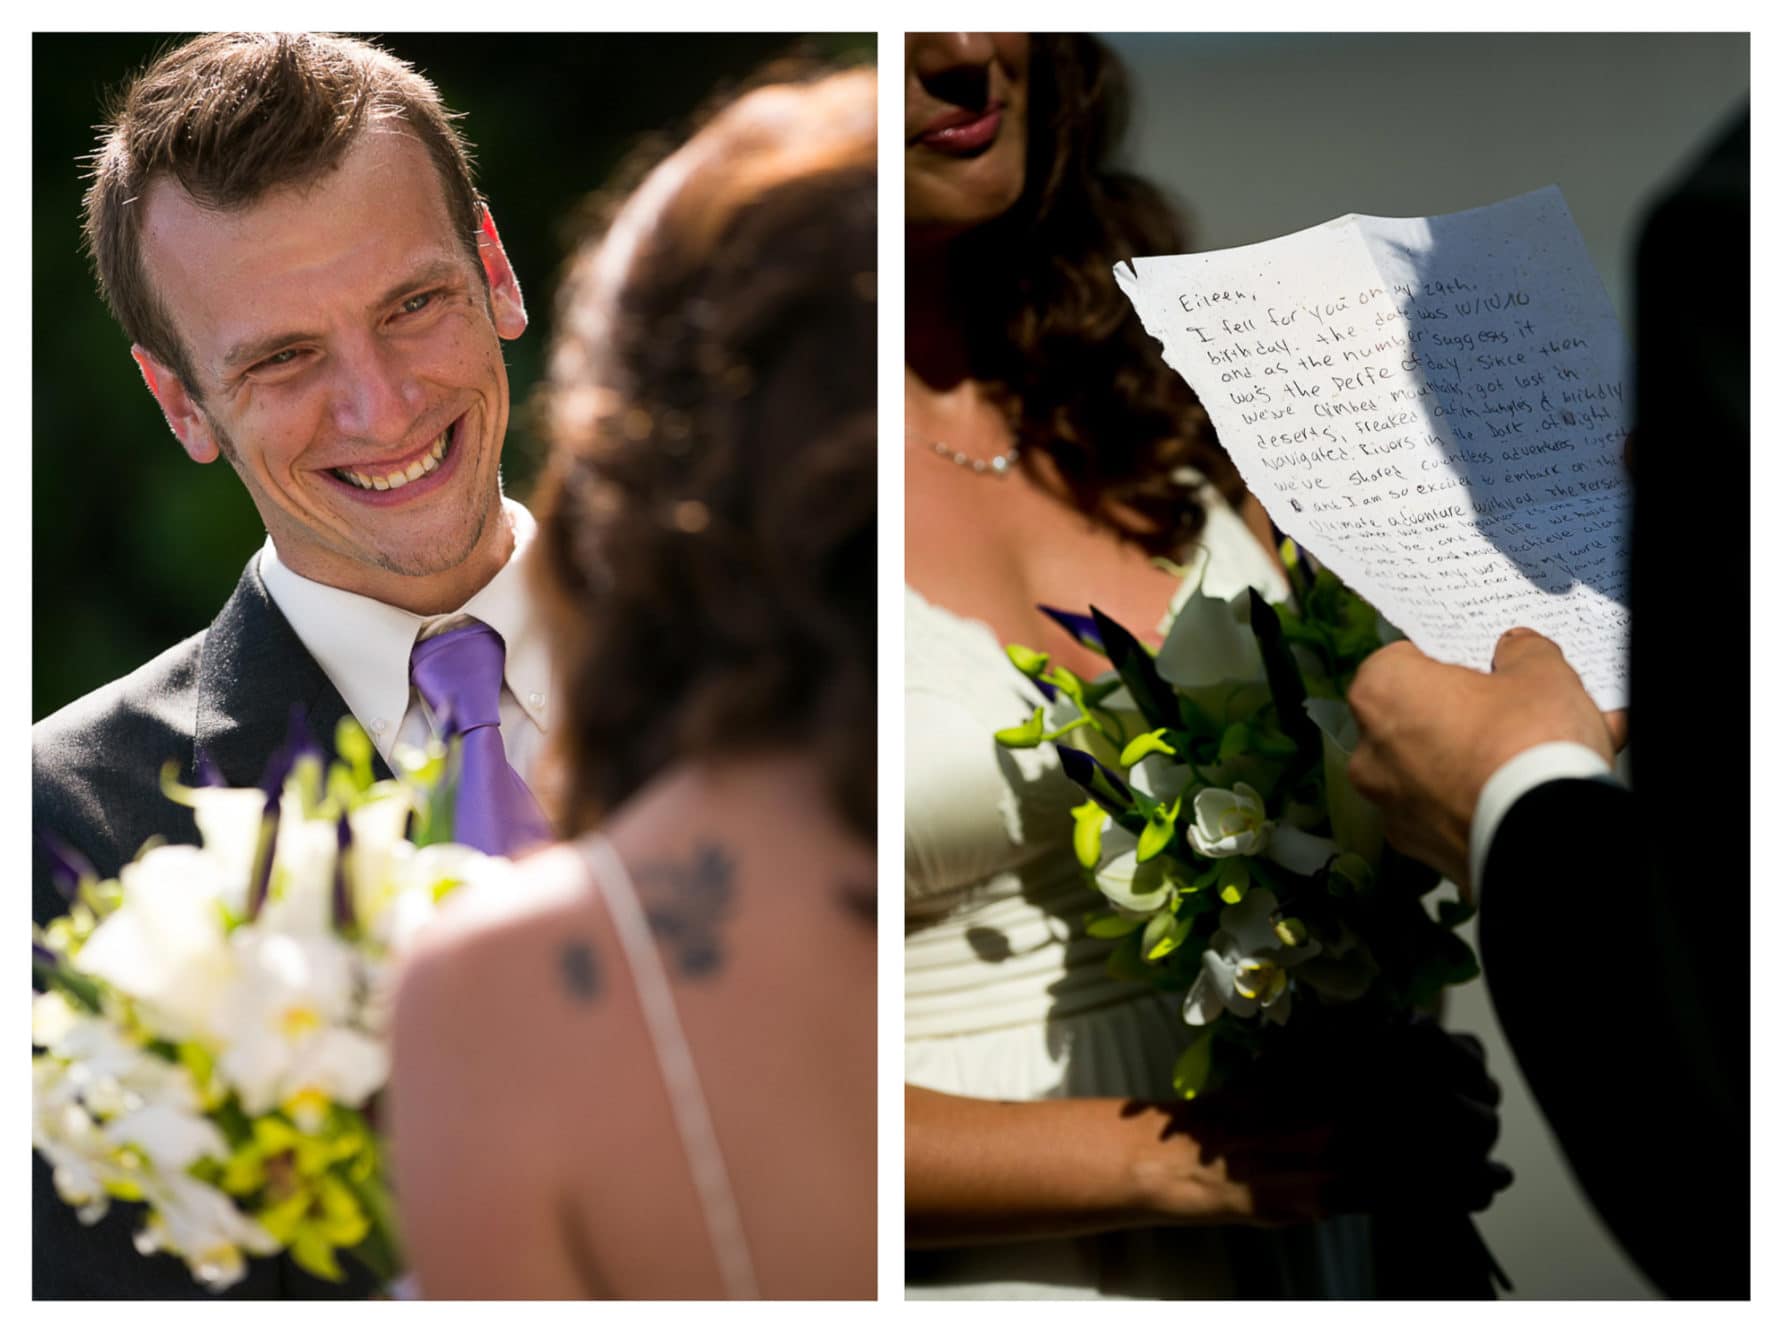 Groom smiling during wedding ceremony. Elopements are so special!